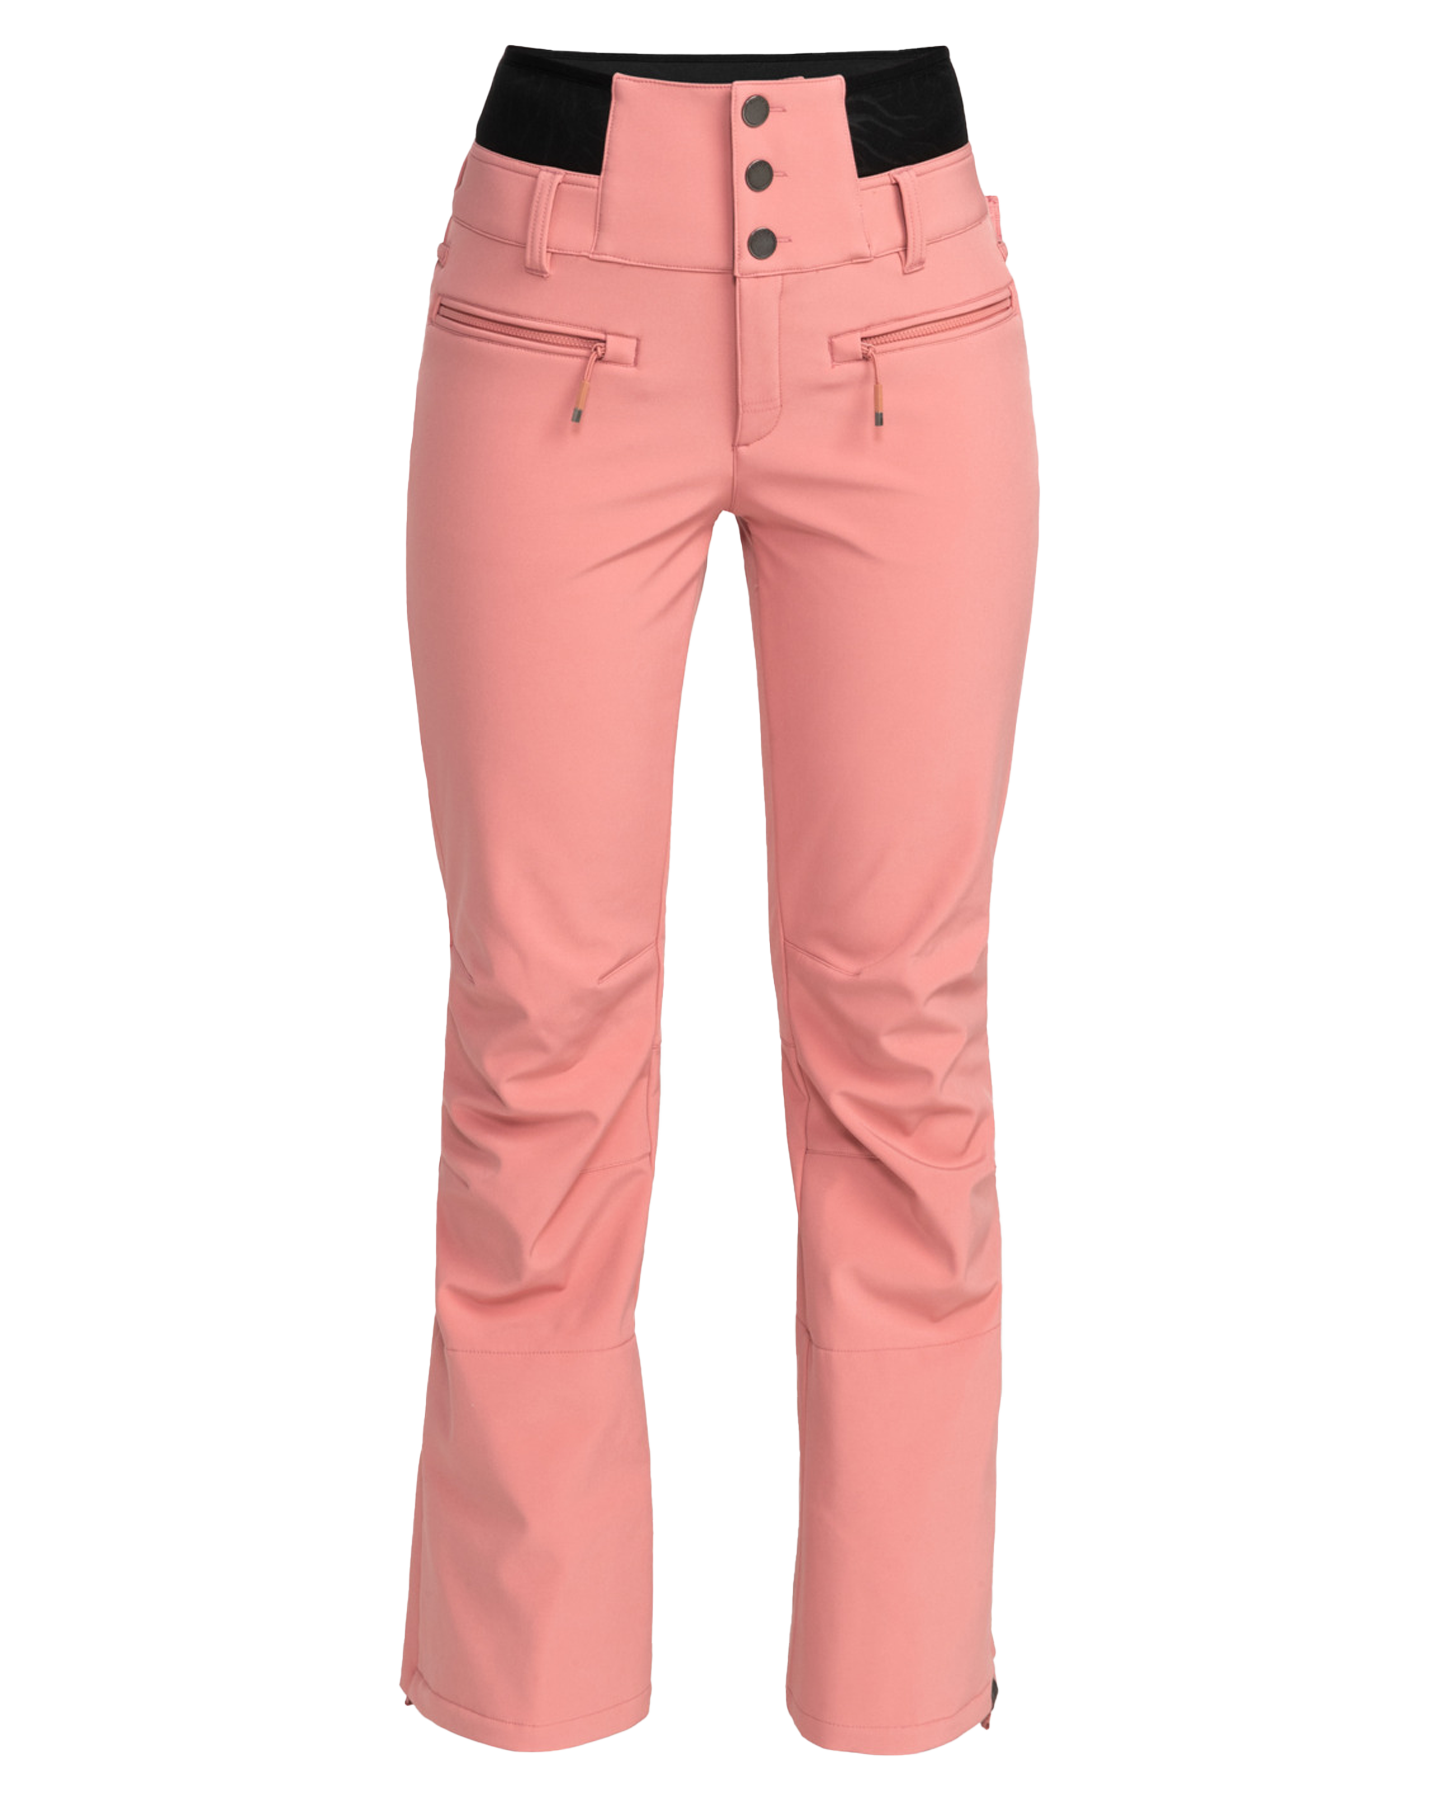 Roxy Womens Rising High Technical Snow Pants - Dusty Rose